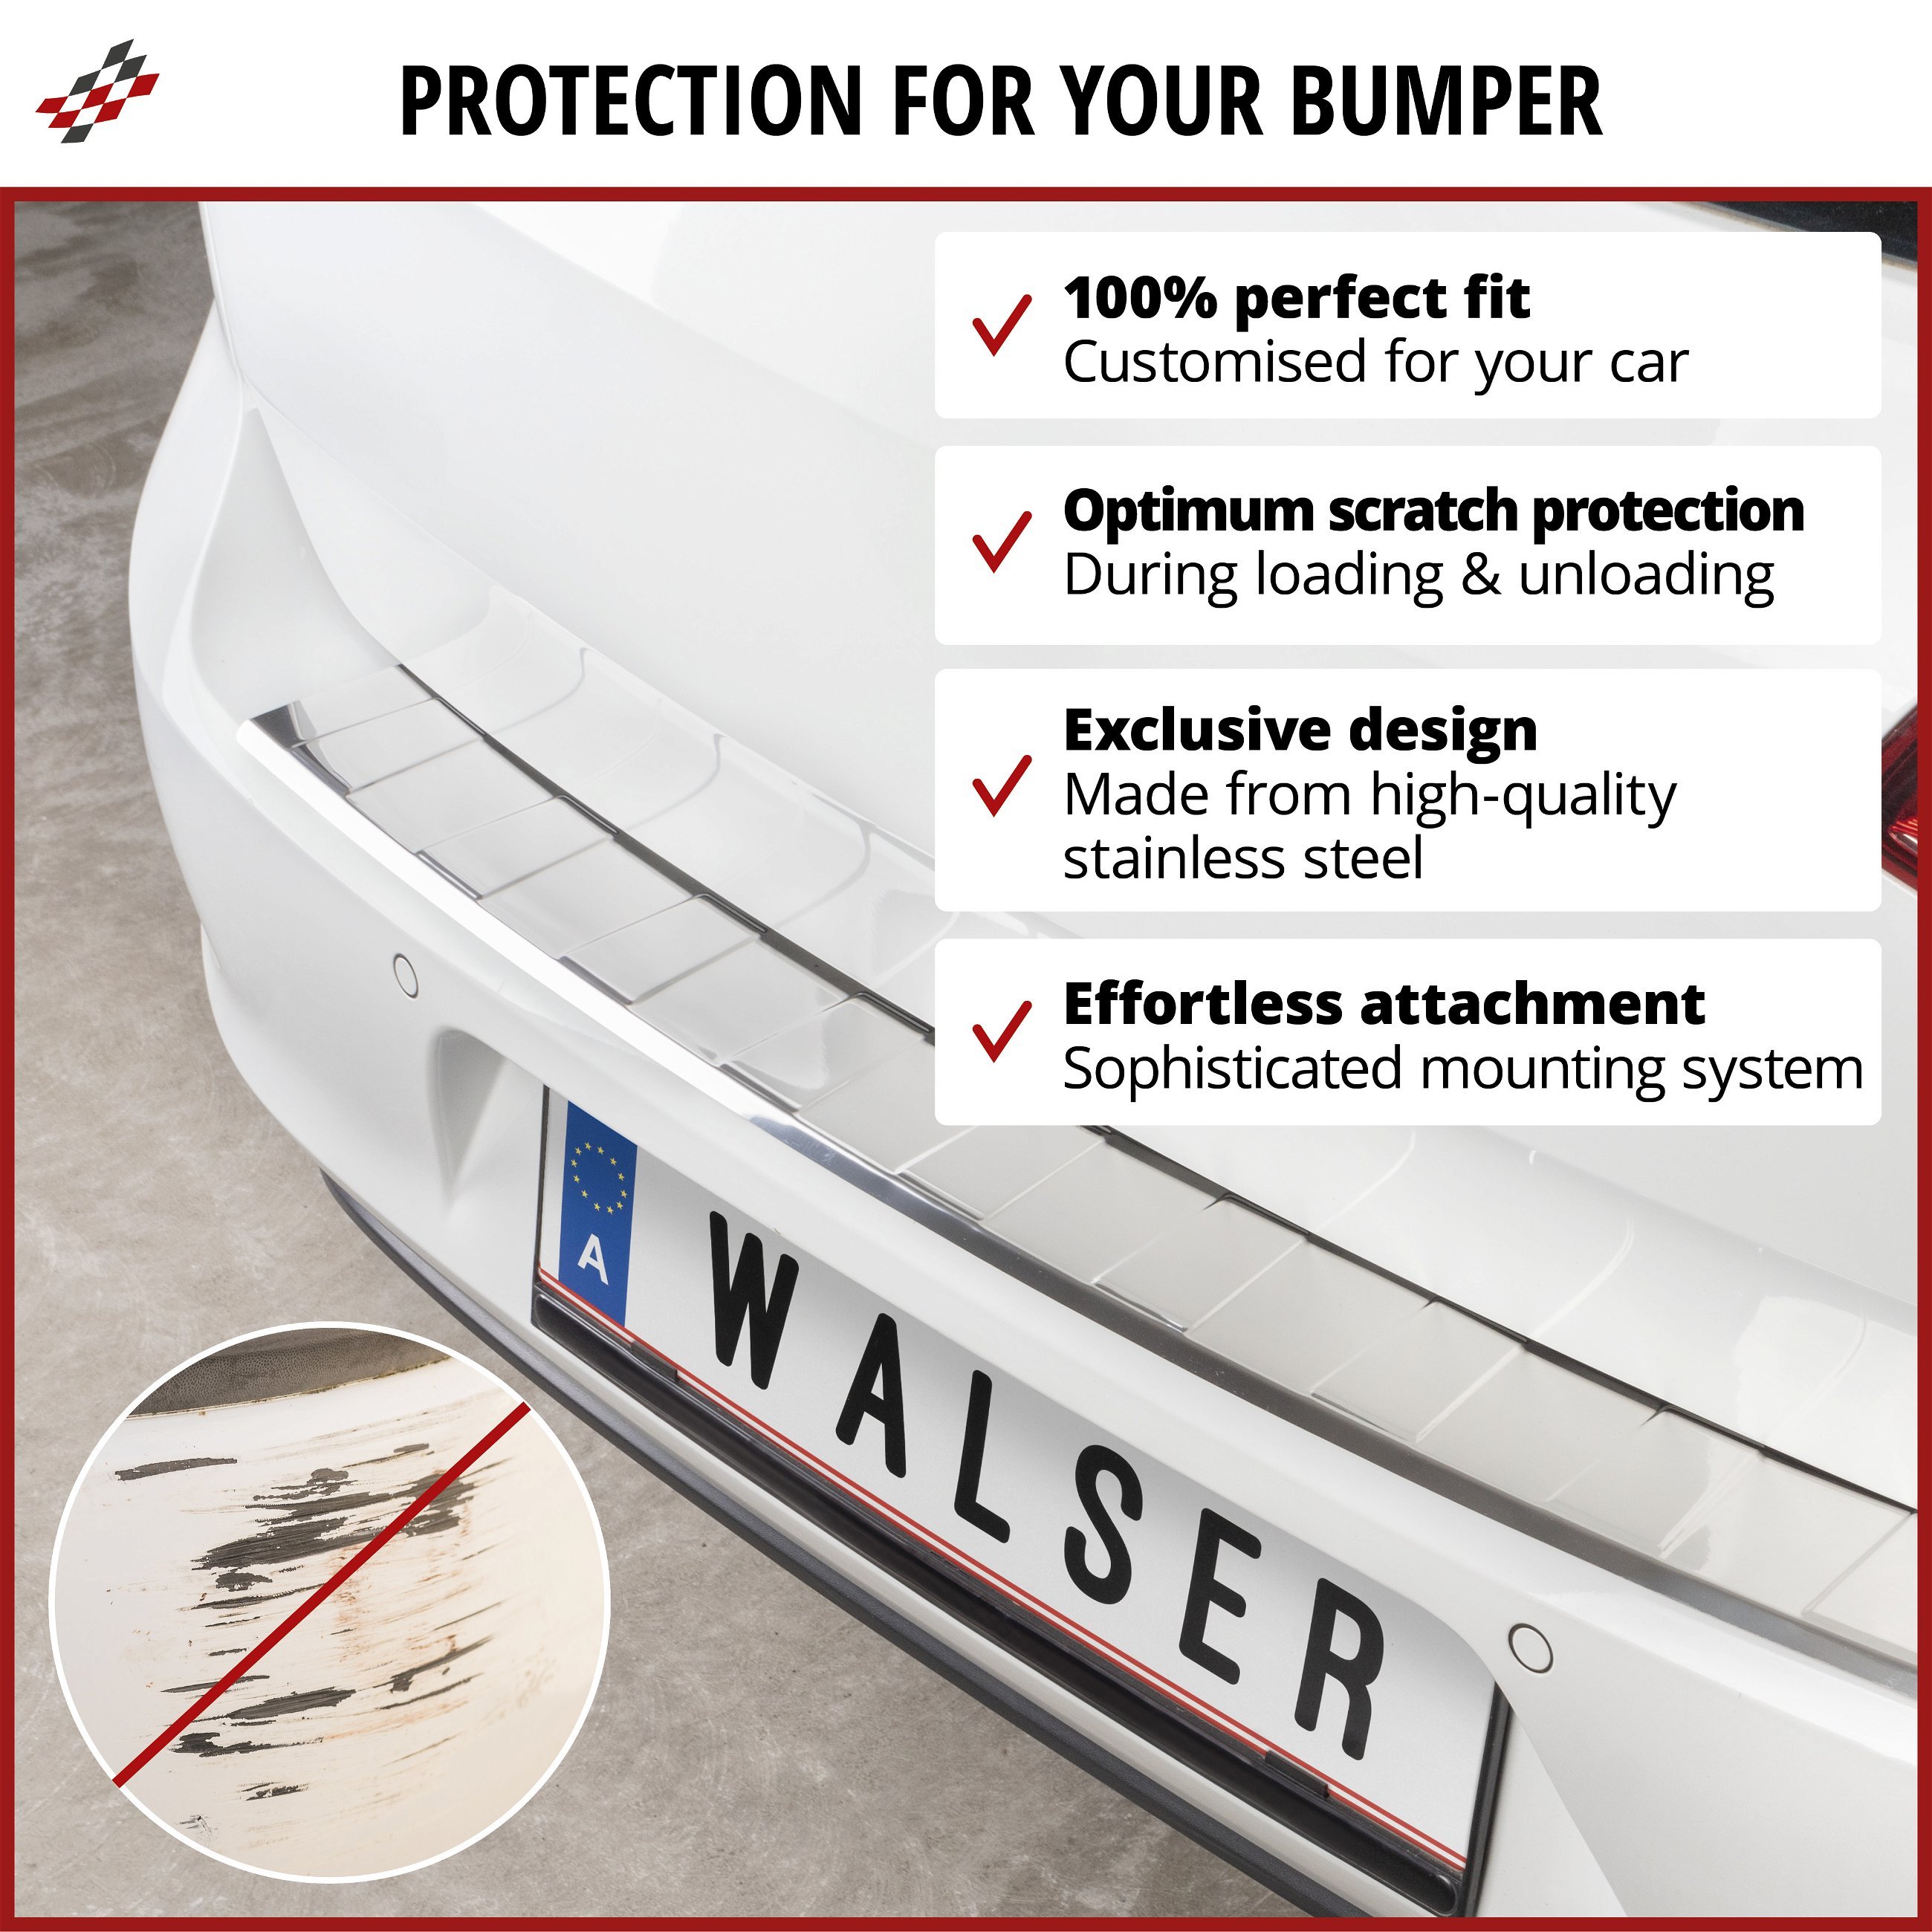 Bumper Protection Proguard made of stainless steel for Mercedes-Benz GLC (X253) 06/2015-2019